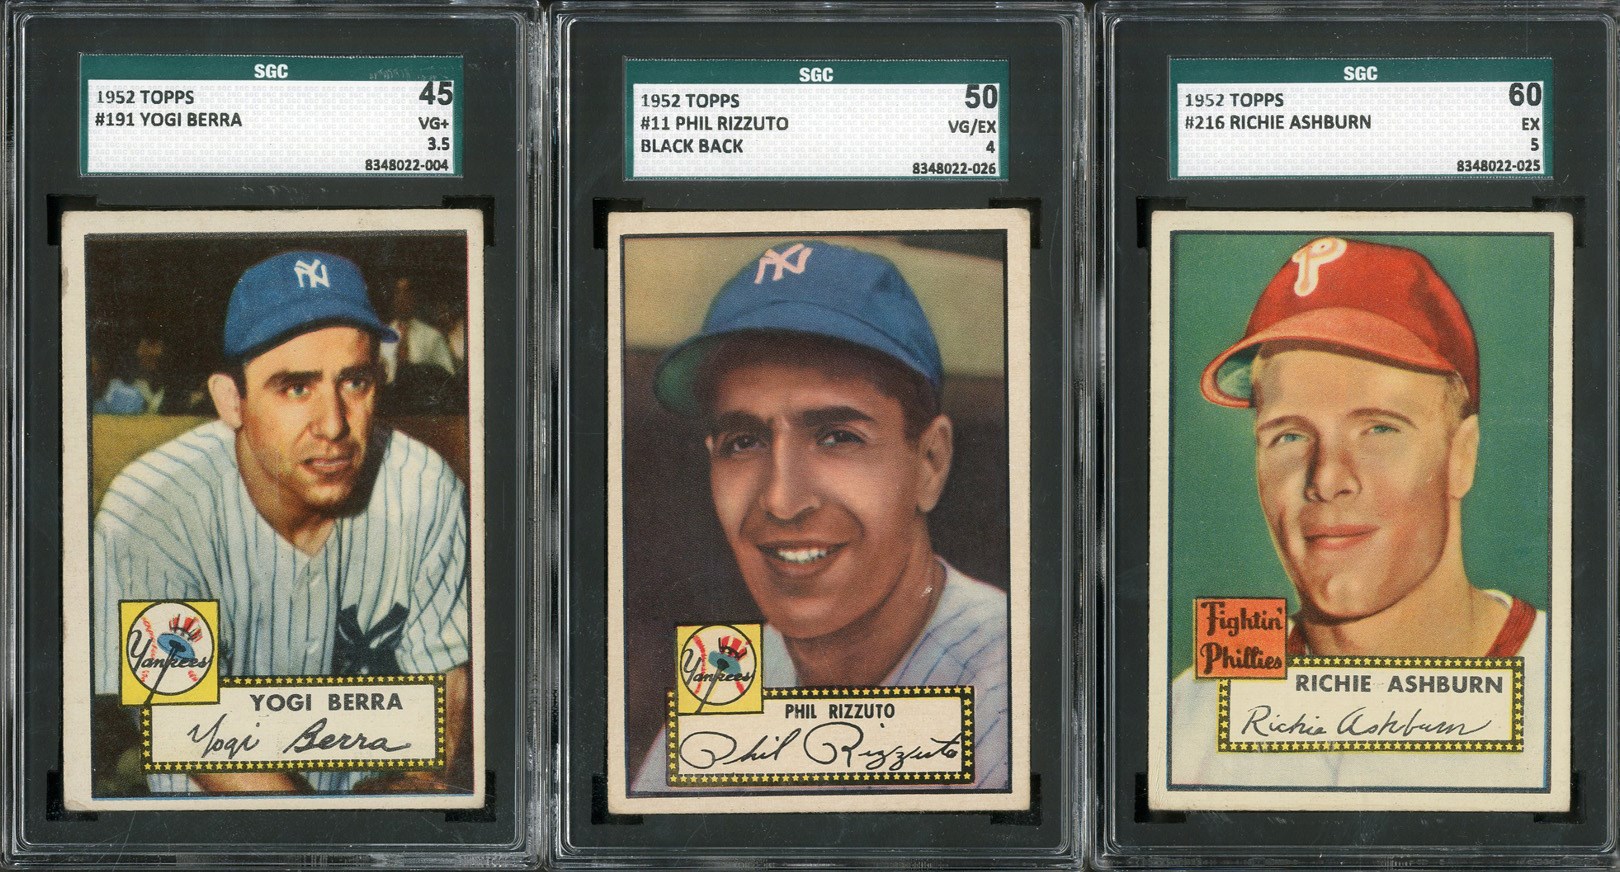 1952 Topps Collection of 200 Cards with 16 High Numbers with SGC Graded